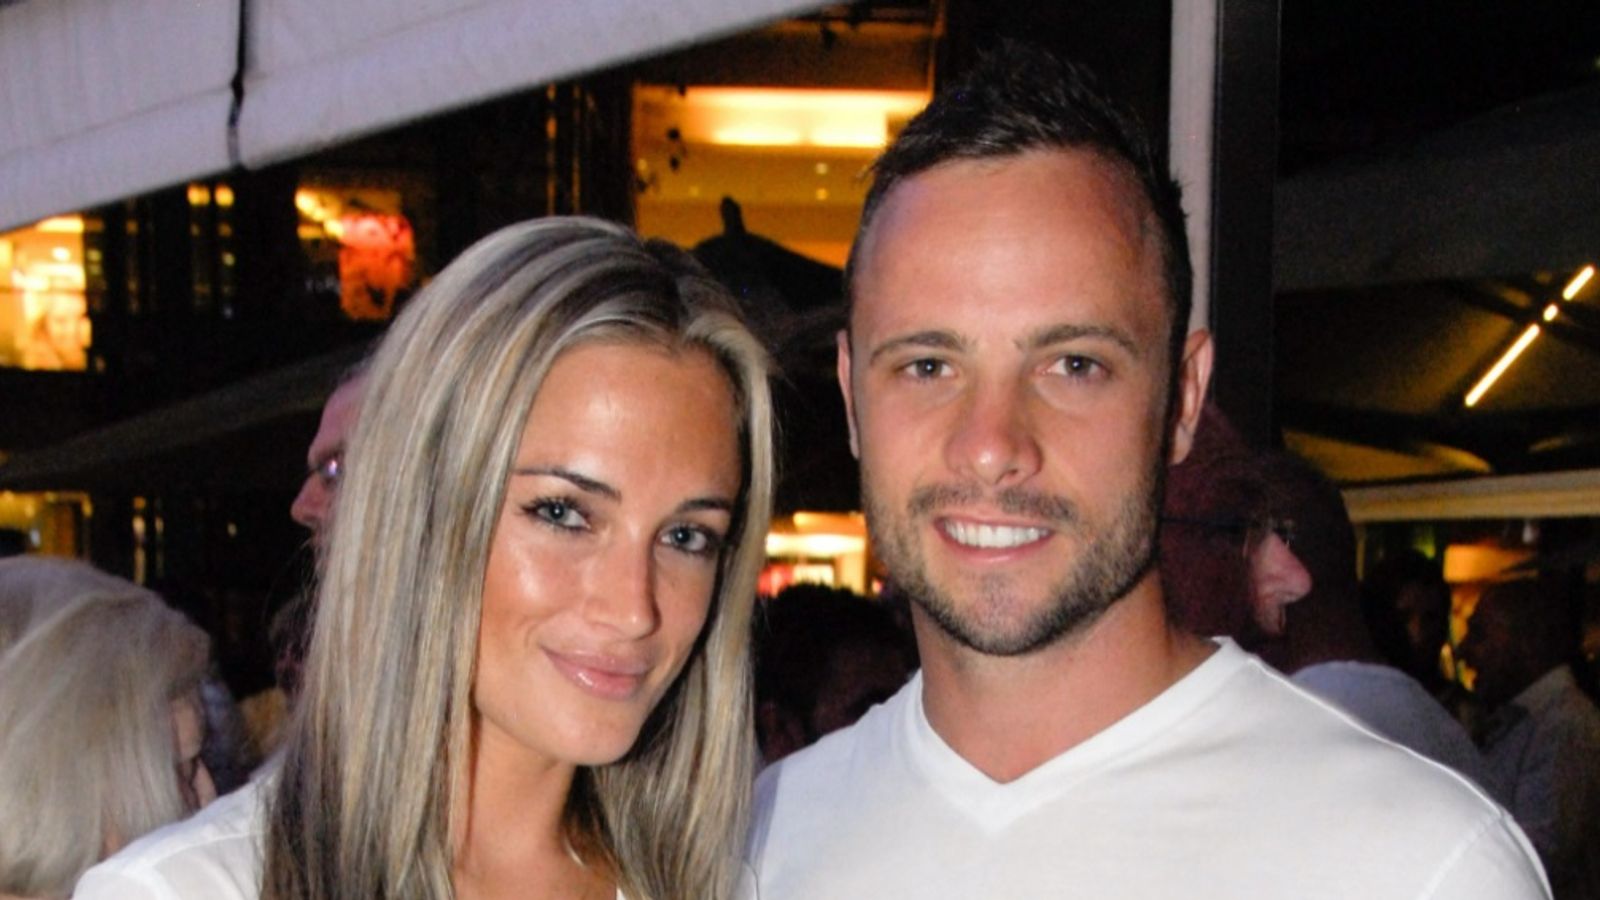 Oscar Pistorius will not be released early from 13-year jail sentence, parole board decides